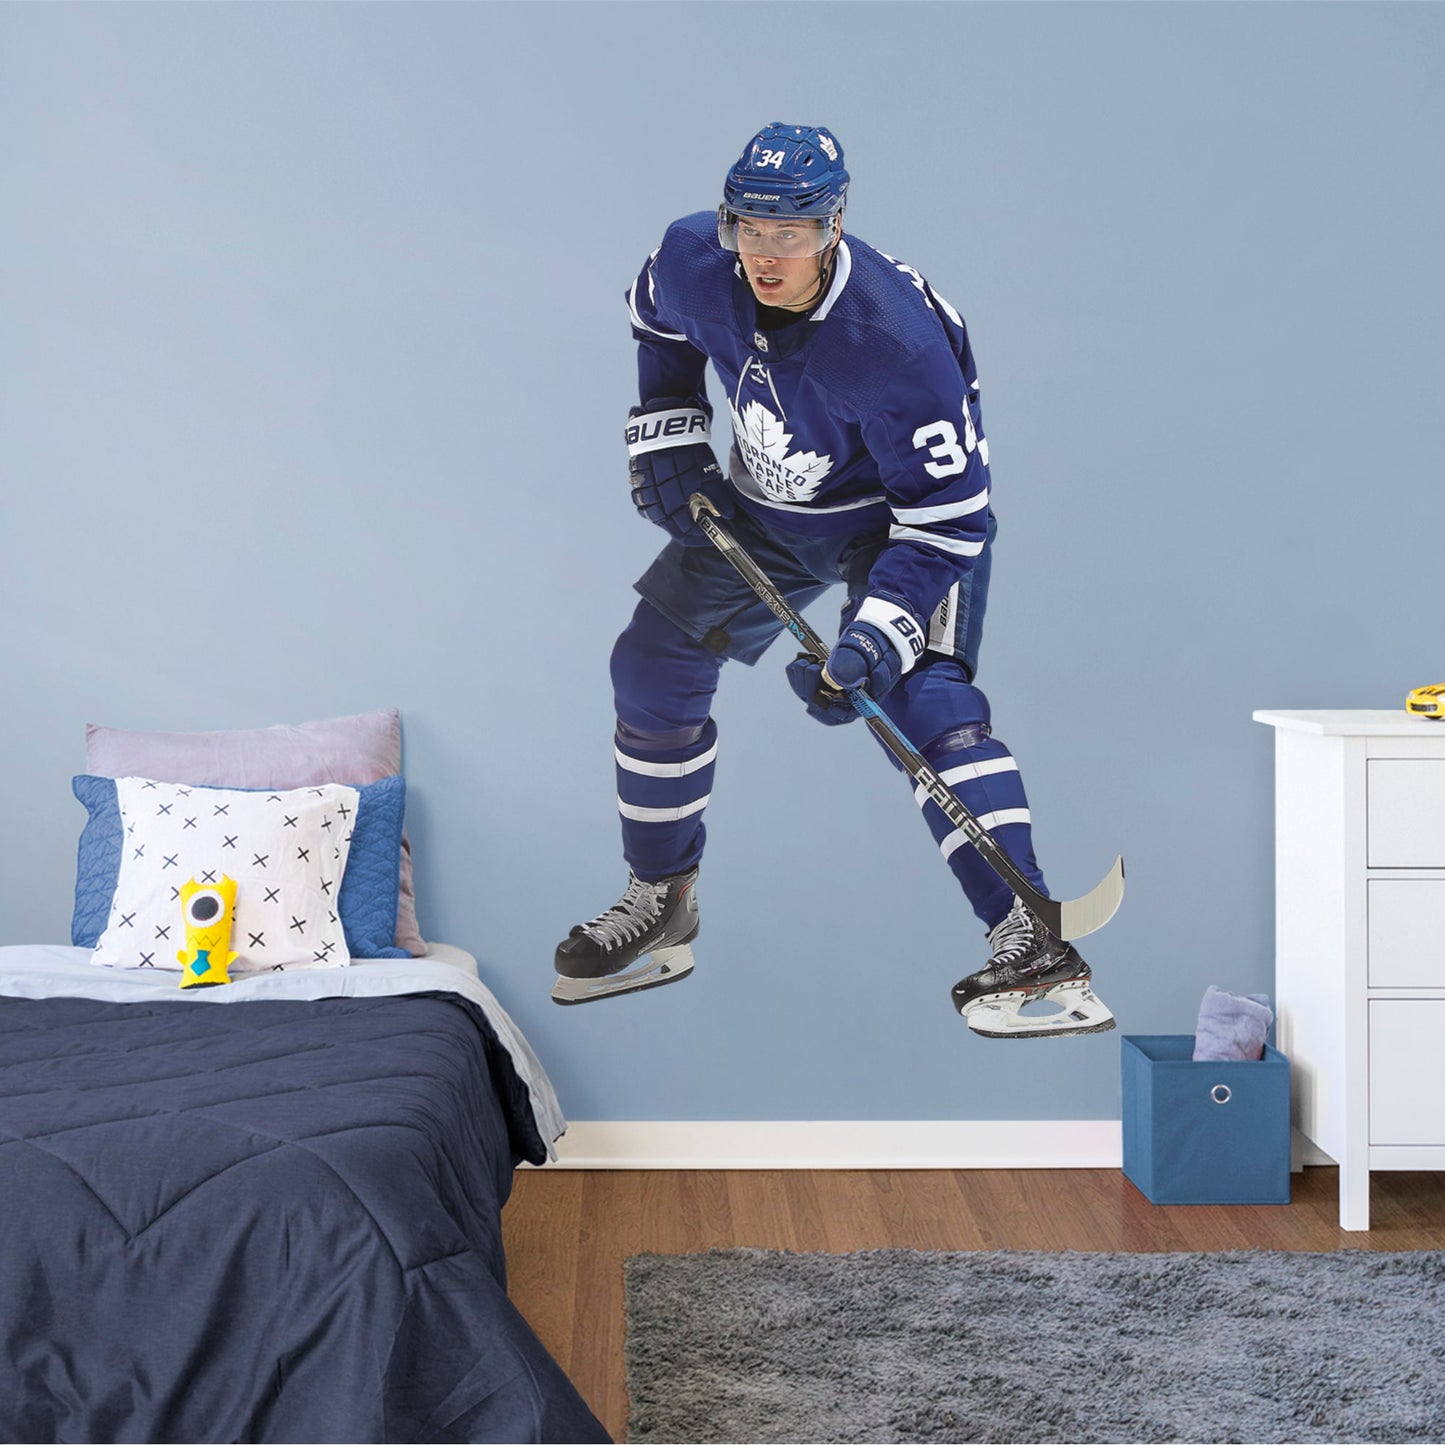 Life-Size Athlete + 2 Decals (48"W x 76"H) He was the first NHL player in modern history to land four goals in his league debut, and now, you can make the Toronto Maple Leafs’ center Auston Matthews part of your bedroom, hallway or game room. Affectionately known as Matty, Austino and Mustache, among other monikers, this durable, tear-resistant NHL wall decal features No. 34 in his navy blue and white Maple Leafs best.